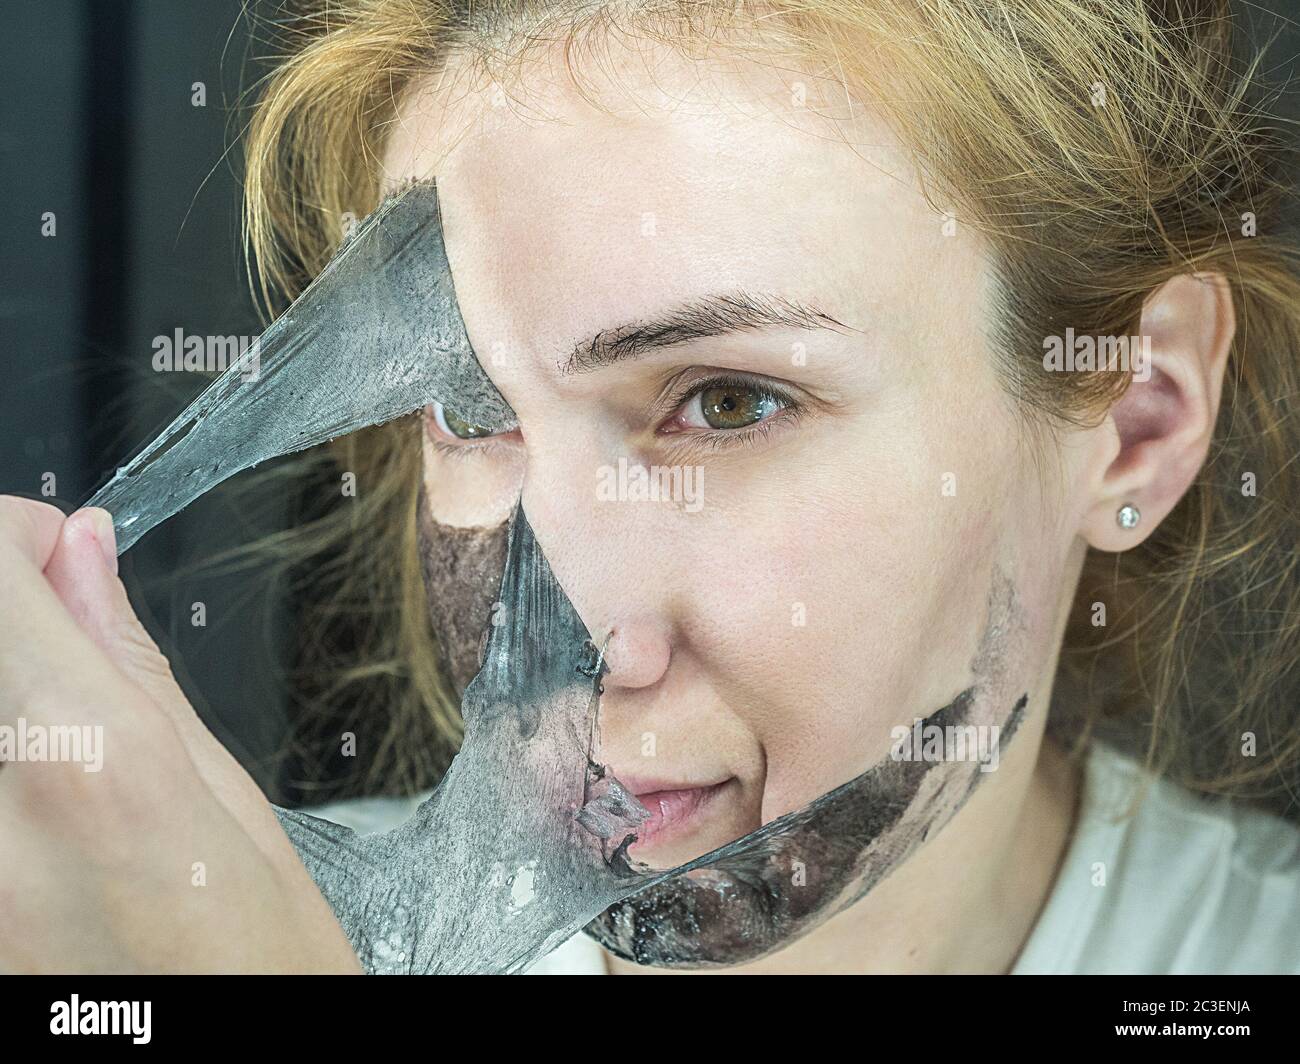 Girl rips off black thin transparent mask to clean pores Stock Photo